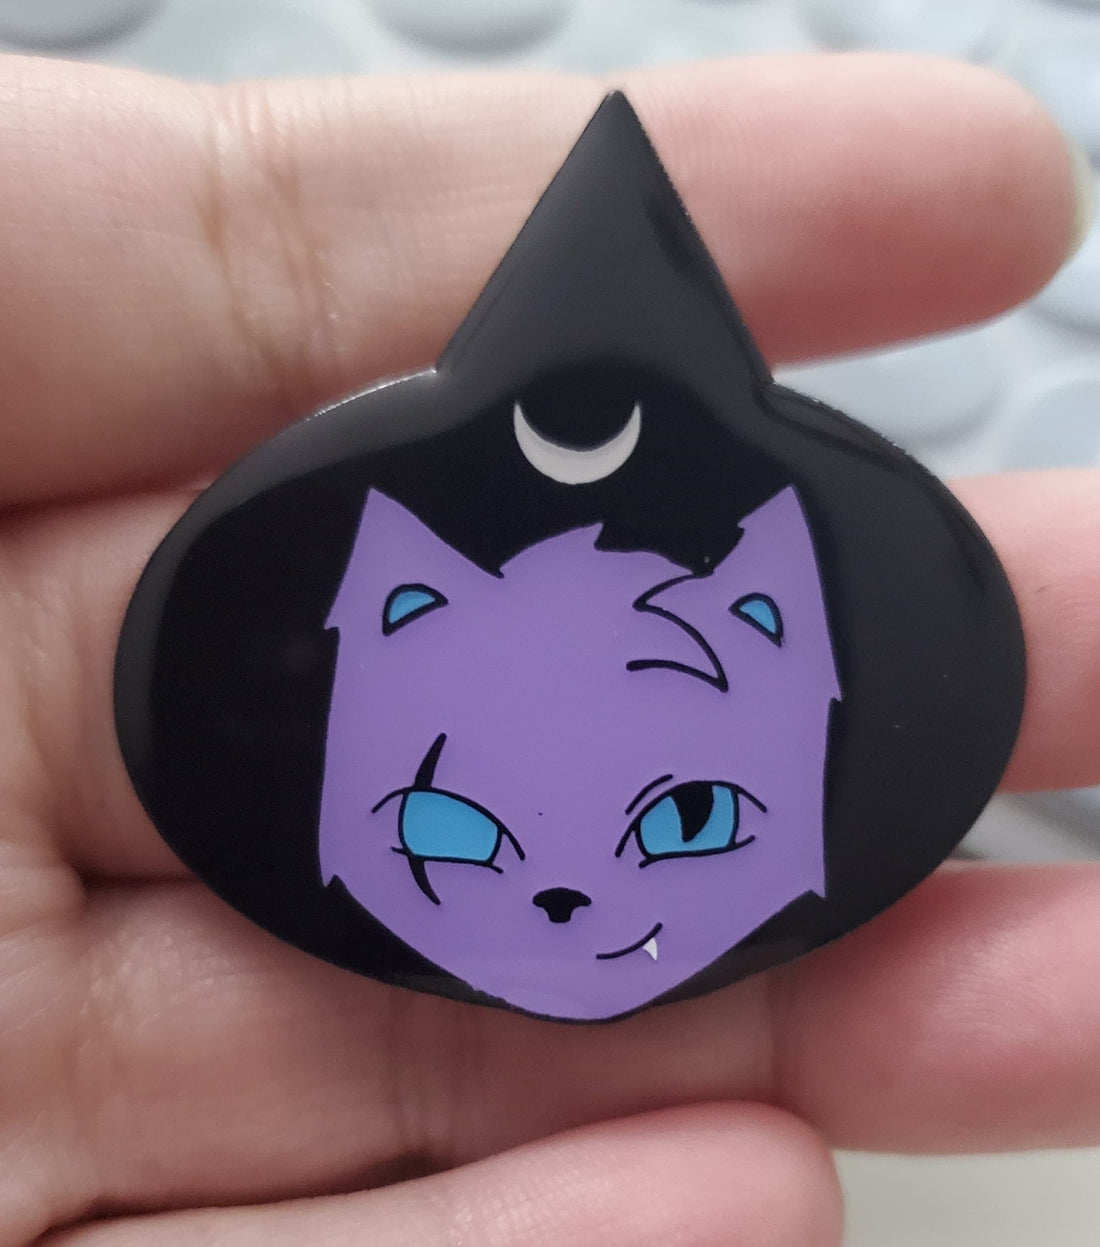 Monster Kitty Society Pins Purple Witch Cat "Runa" - Dyed Soft Enamel Pin